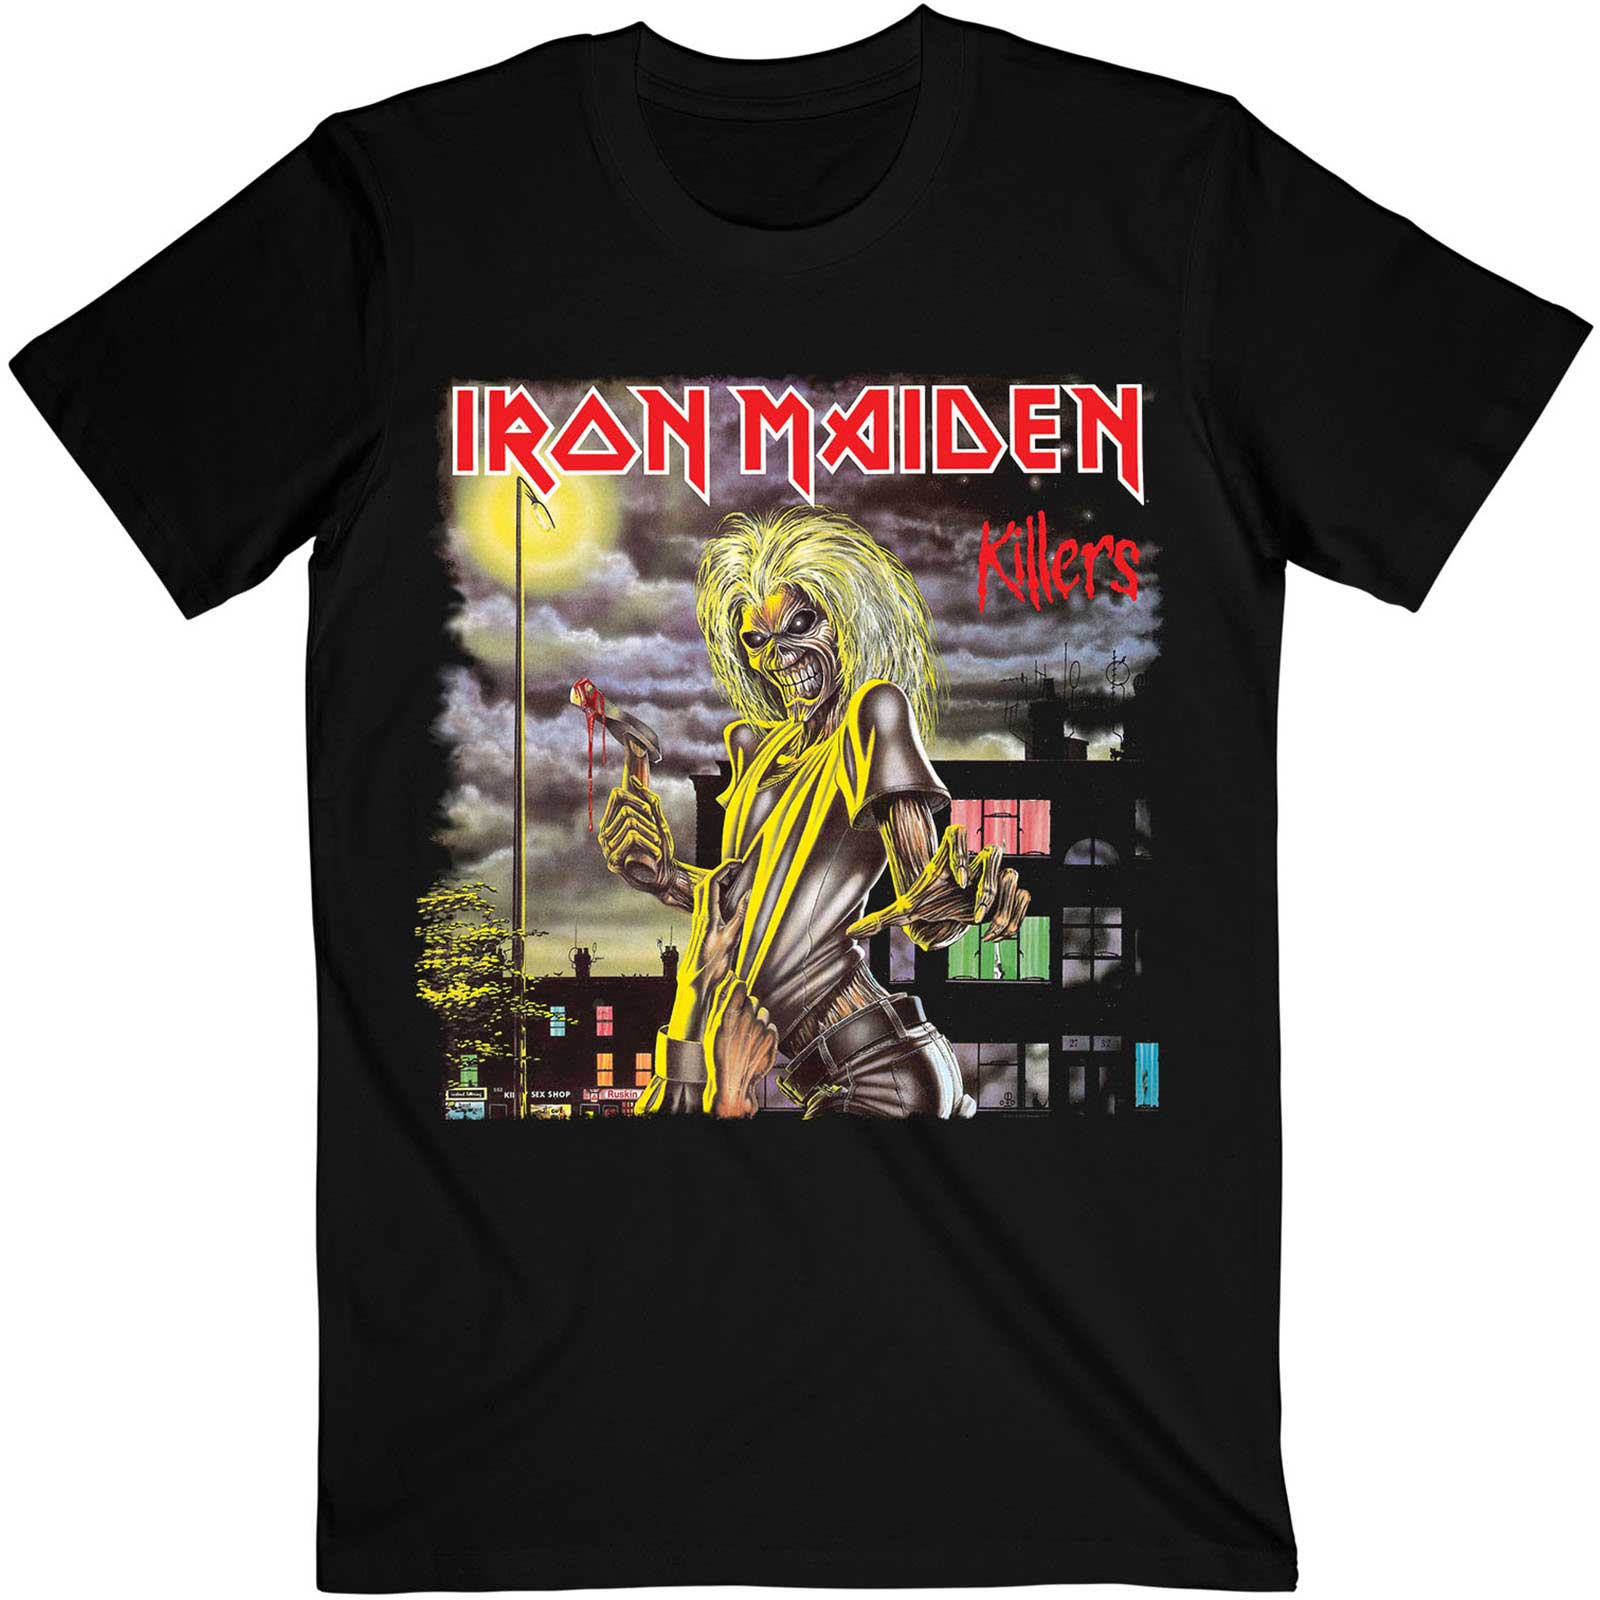 IRON MAIDEN / KILLERS COVER T-SHIRT (L)